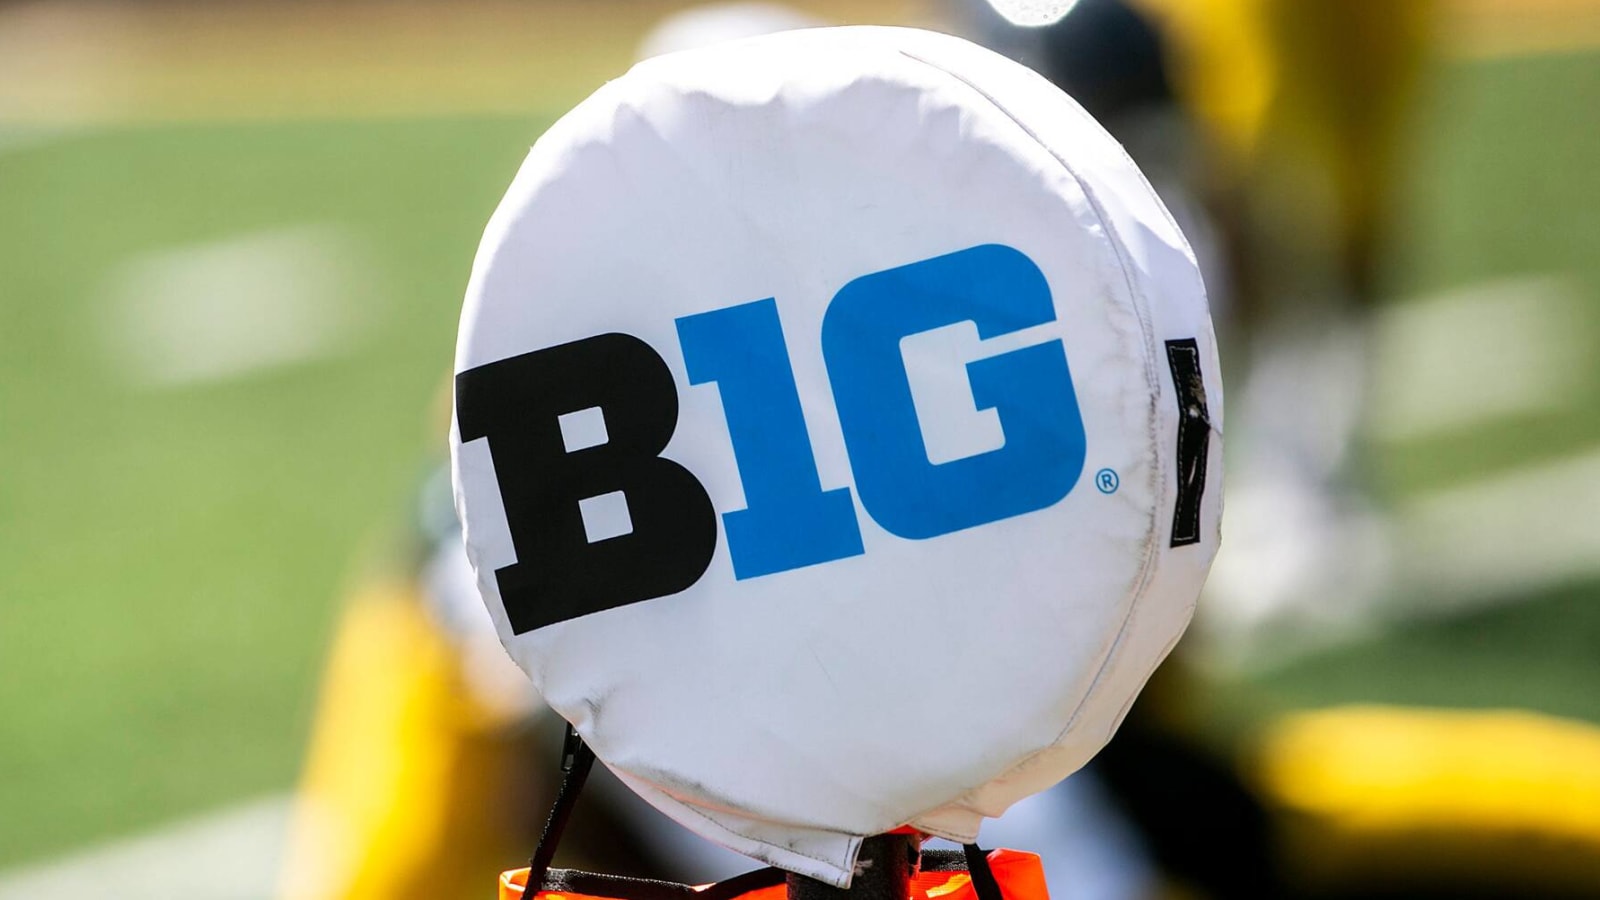 big ten conference channel on dish